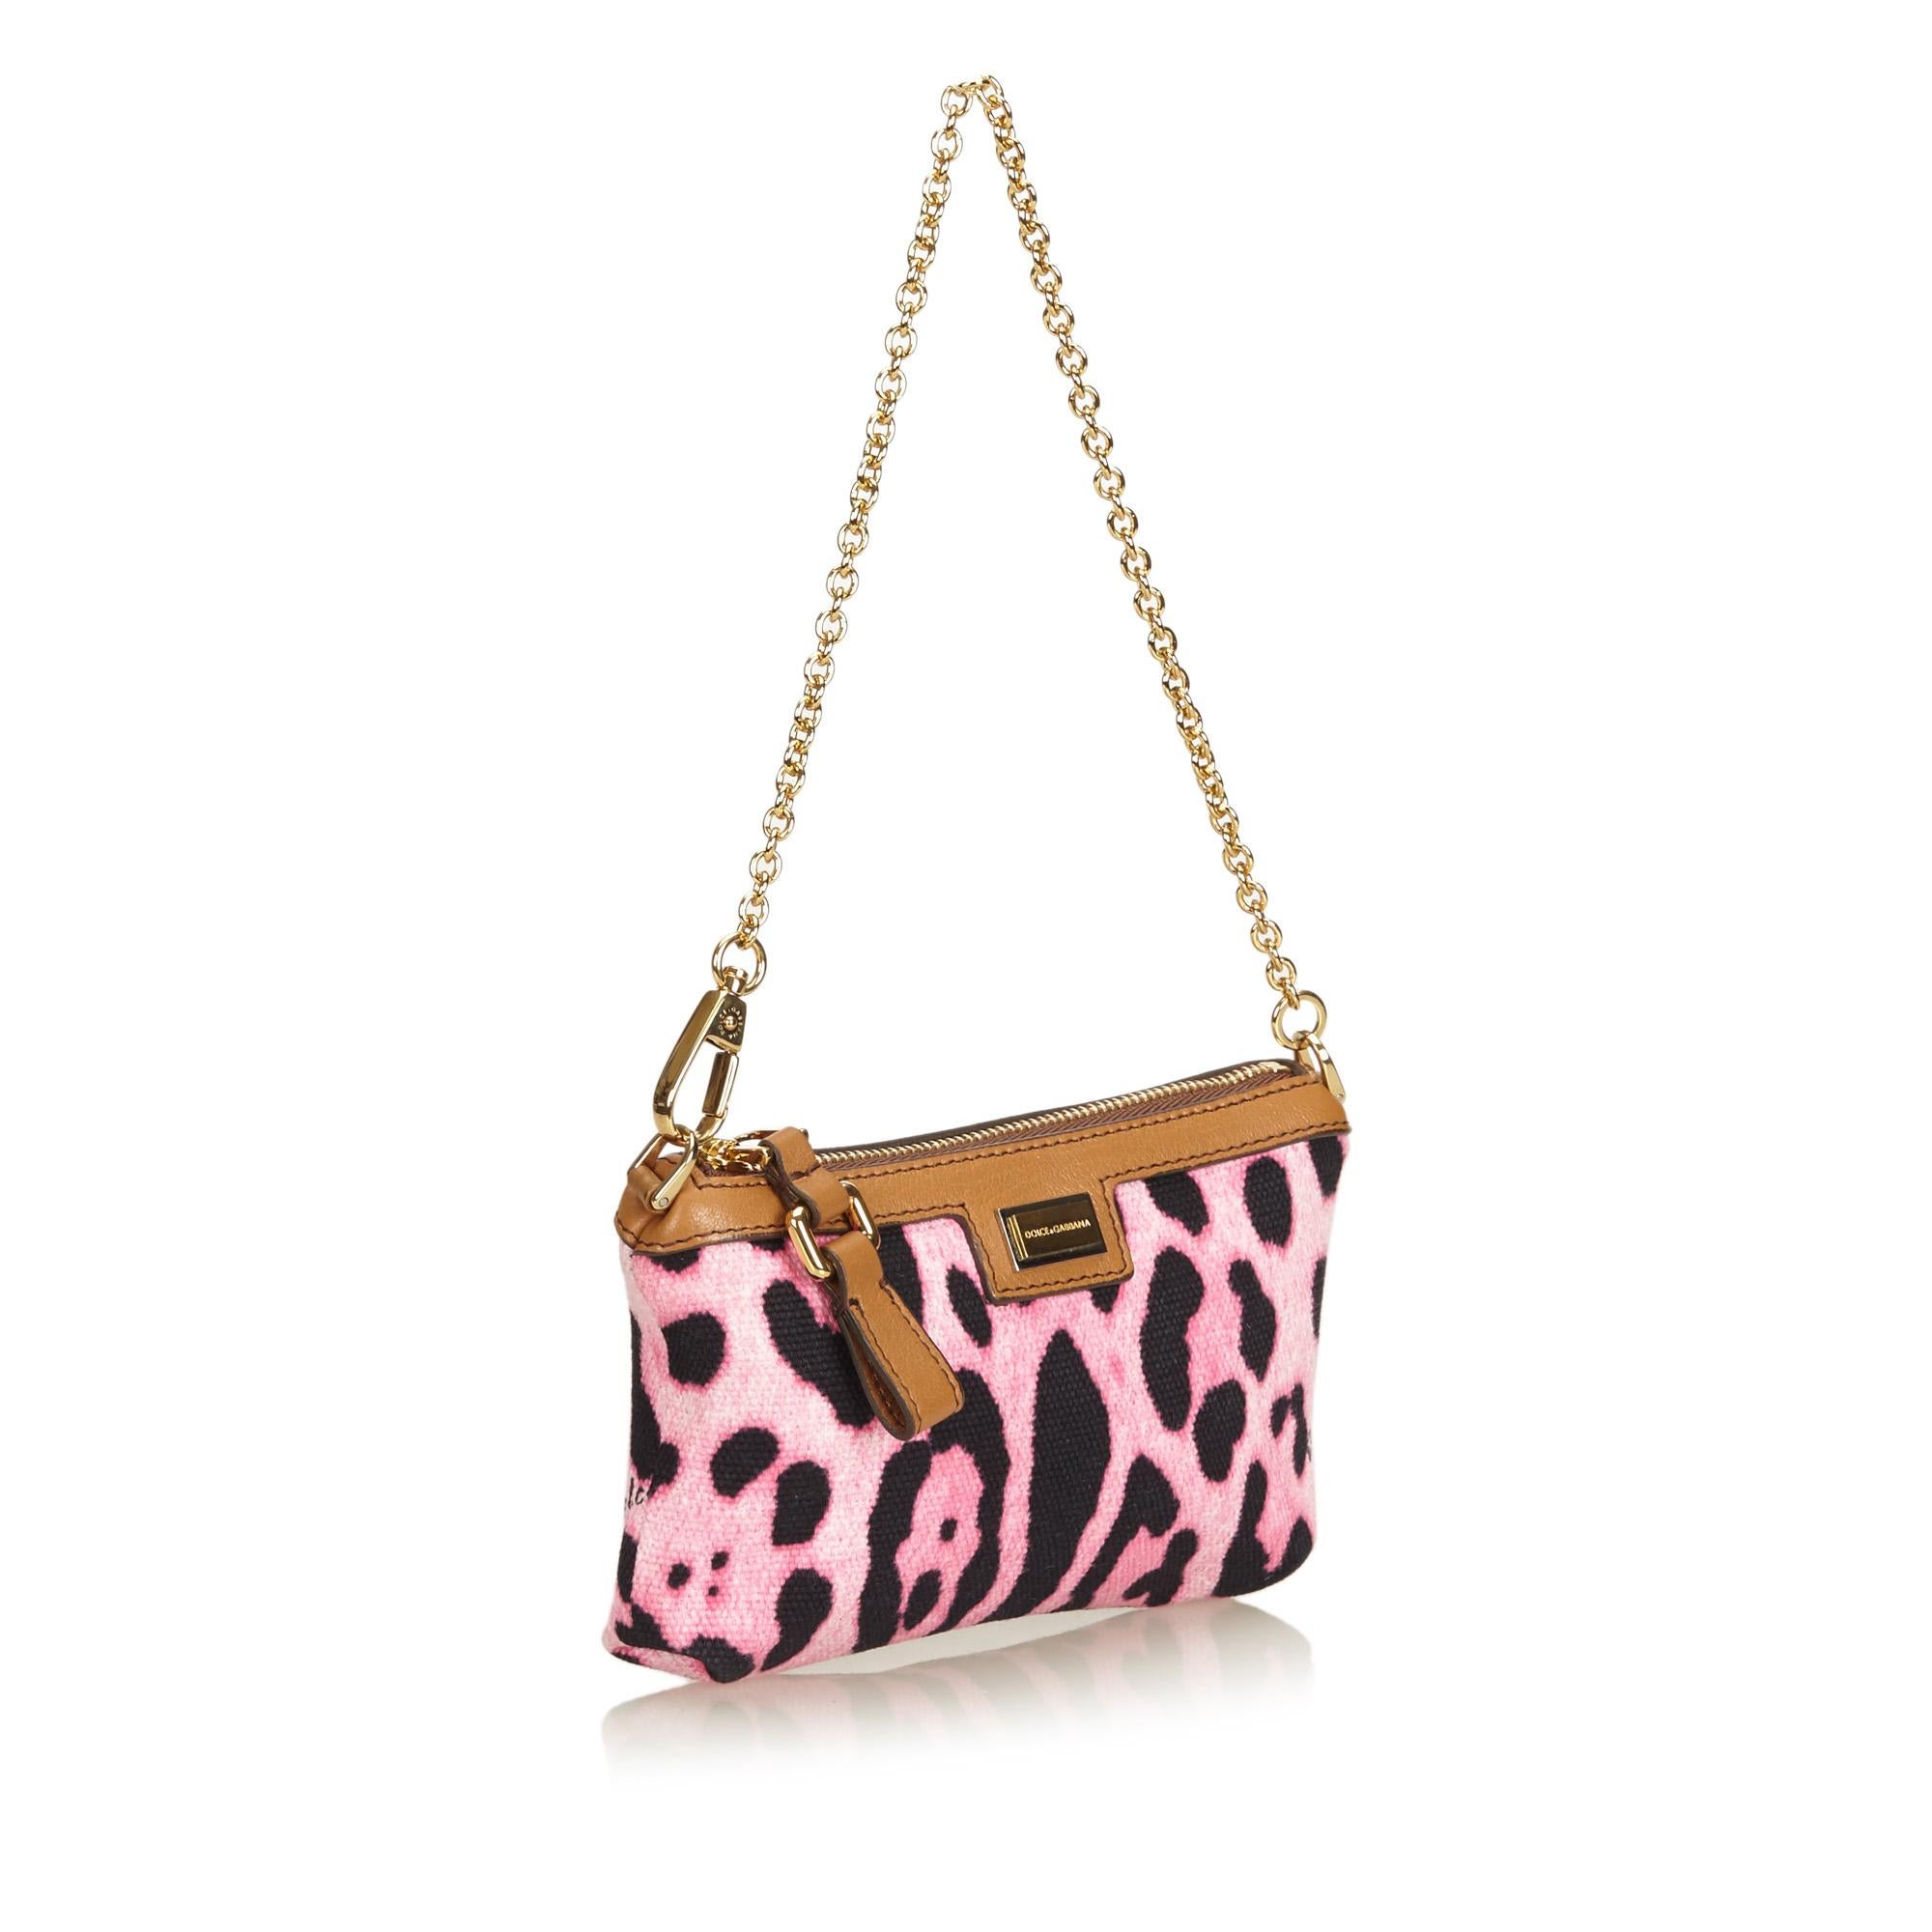 This baguette features a leopard printed canvas body, detachable gold-tone chain strap, and a top zip closure. It carries as AB condition rating.

Inclusions: 
This item does not come with inclusions.

Dimensions:
Length: 10.00 cm
Width: 15.00